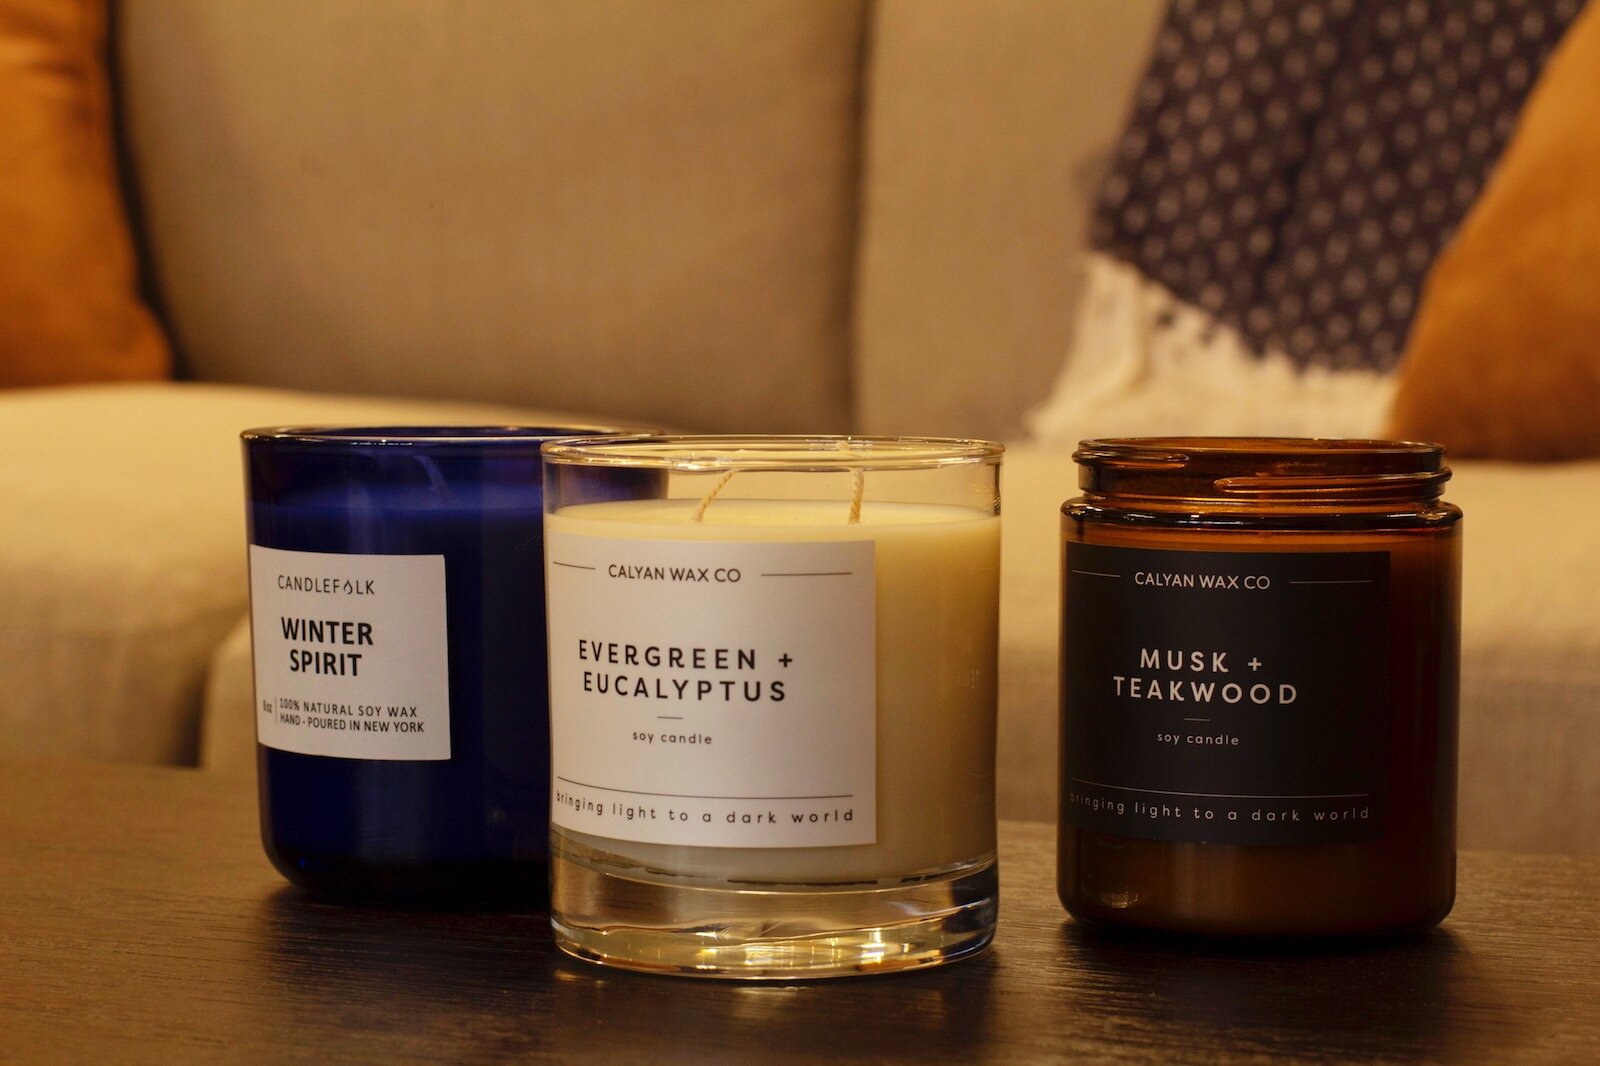 Calyan Wax Co. candles available at House to Home.